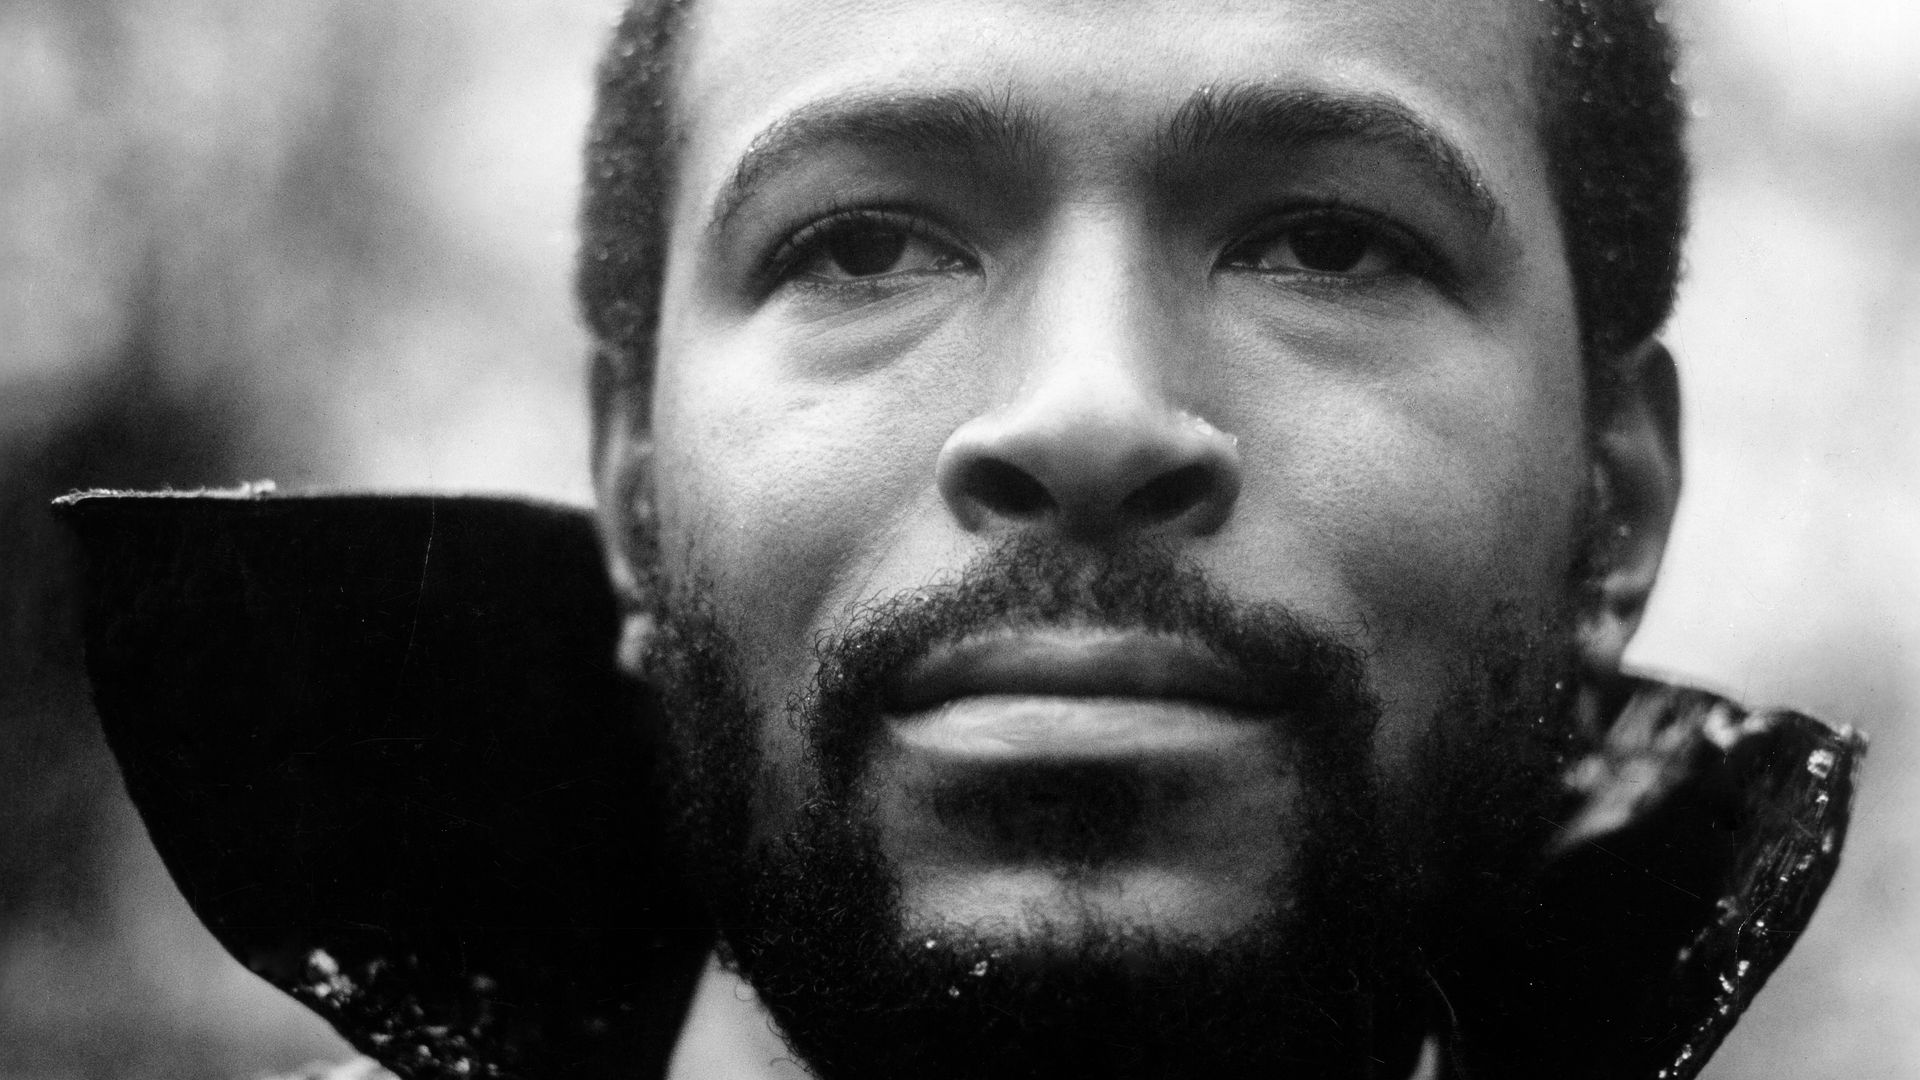 Marvin Gaye poses for a portrait session for his album "What's Going On."